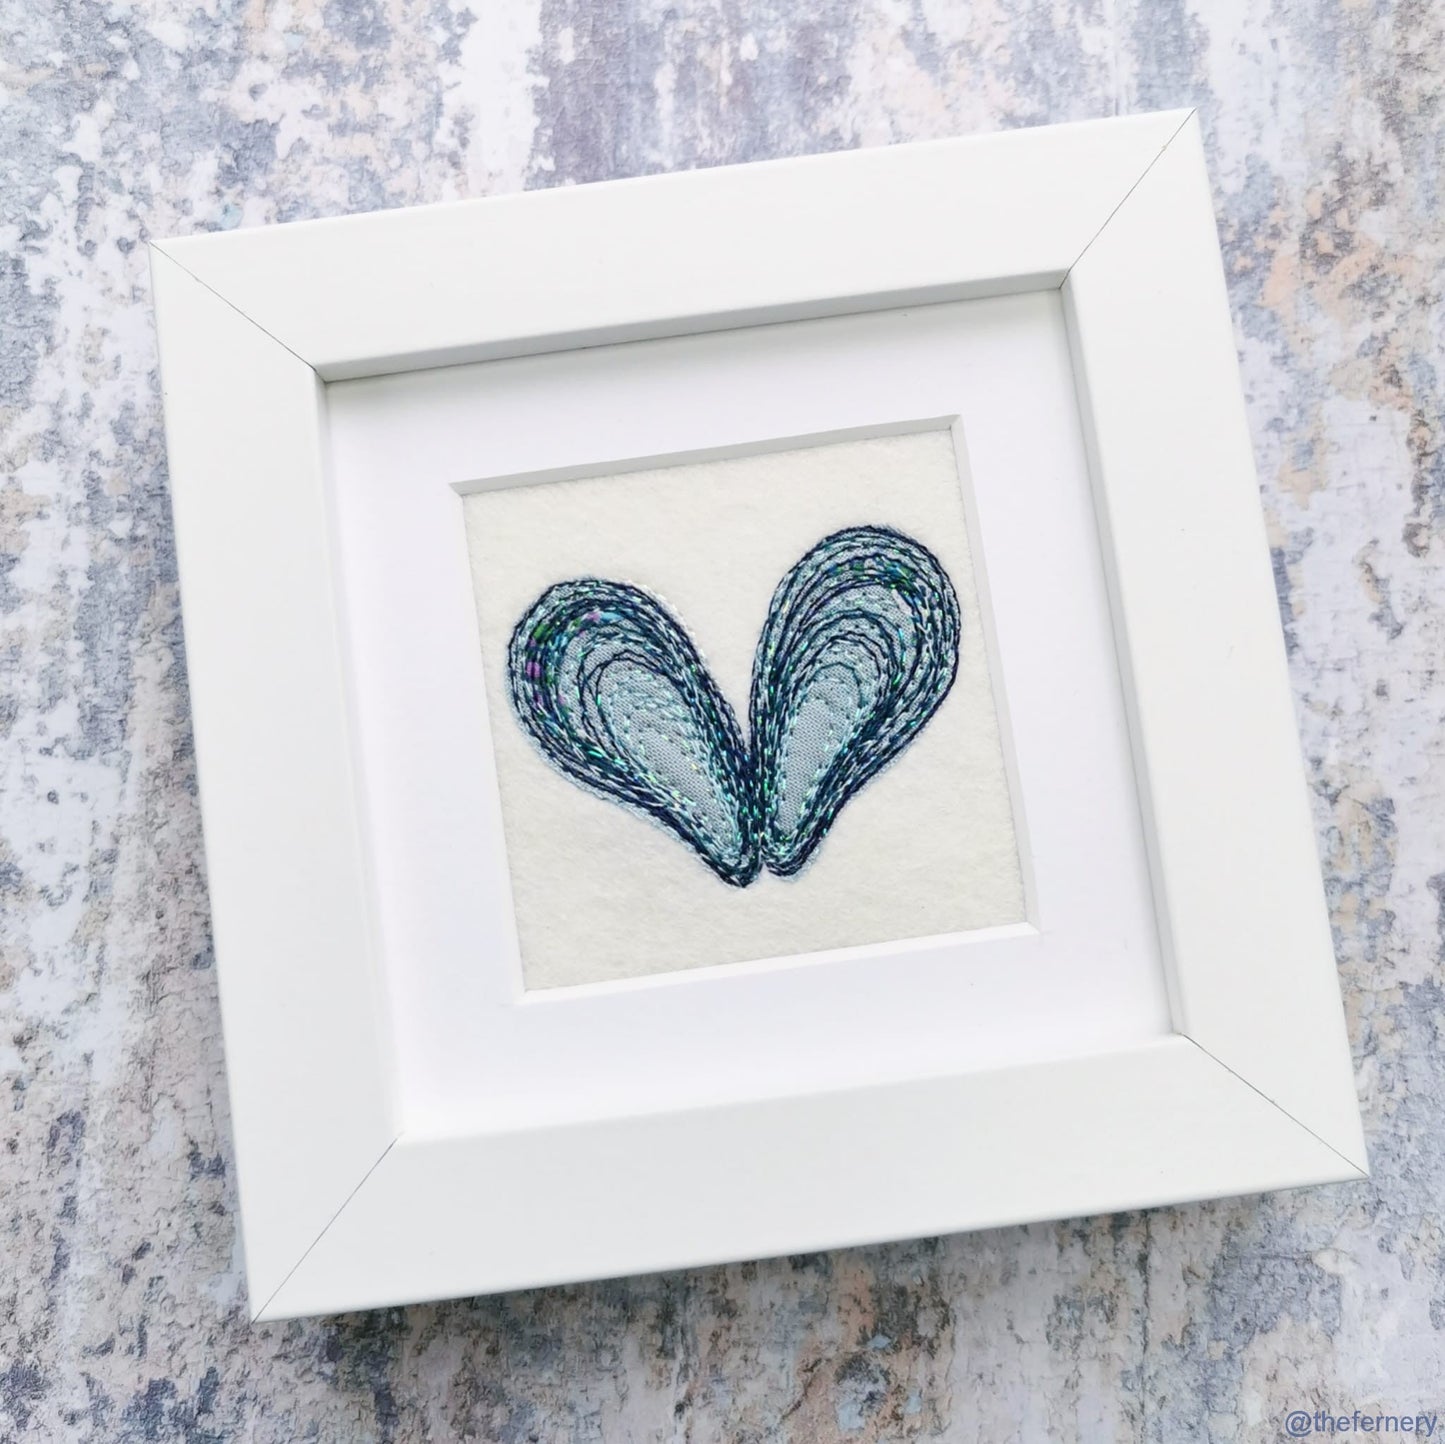 Decoration - Framed Stitched Mussel Heart